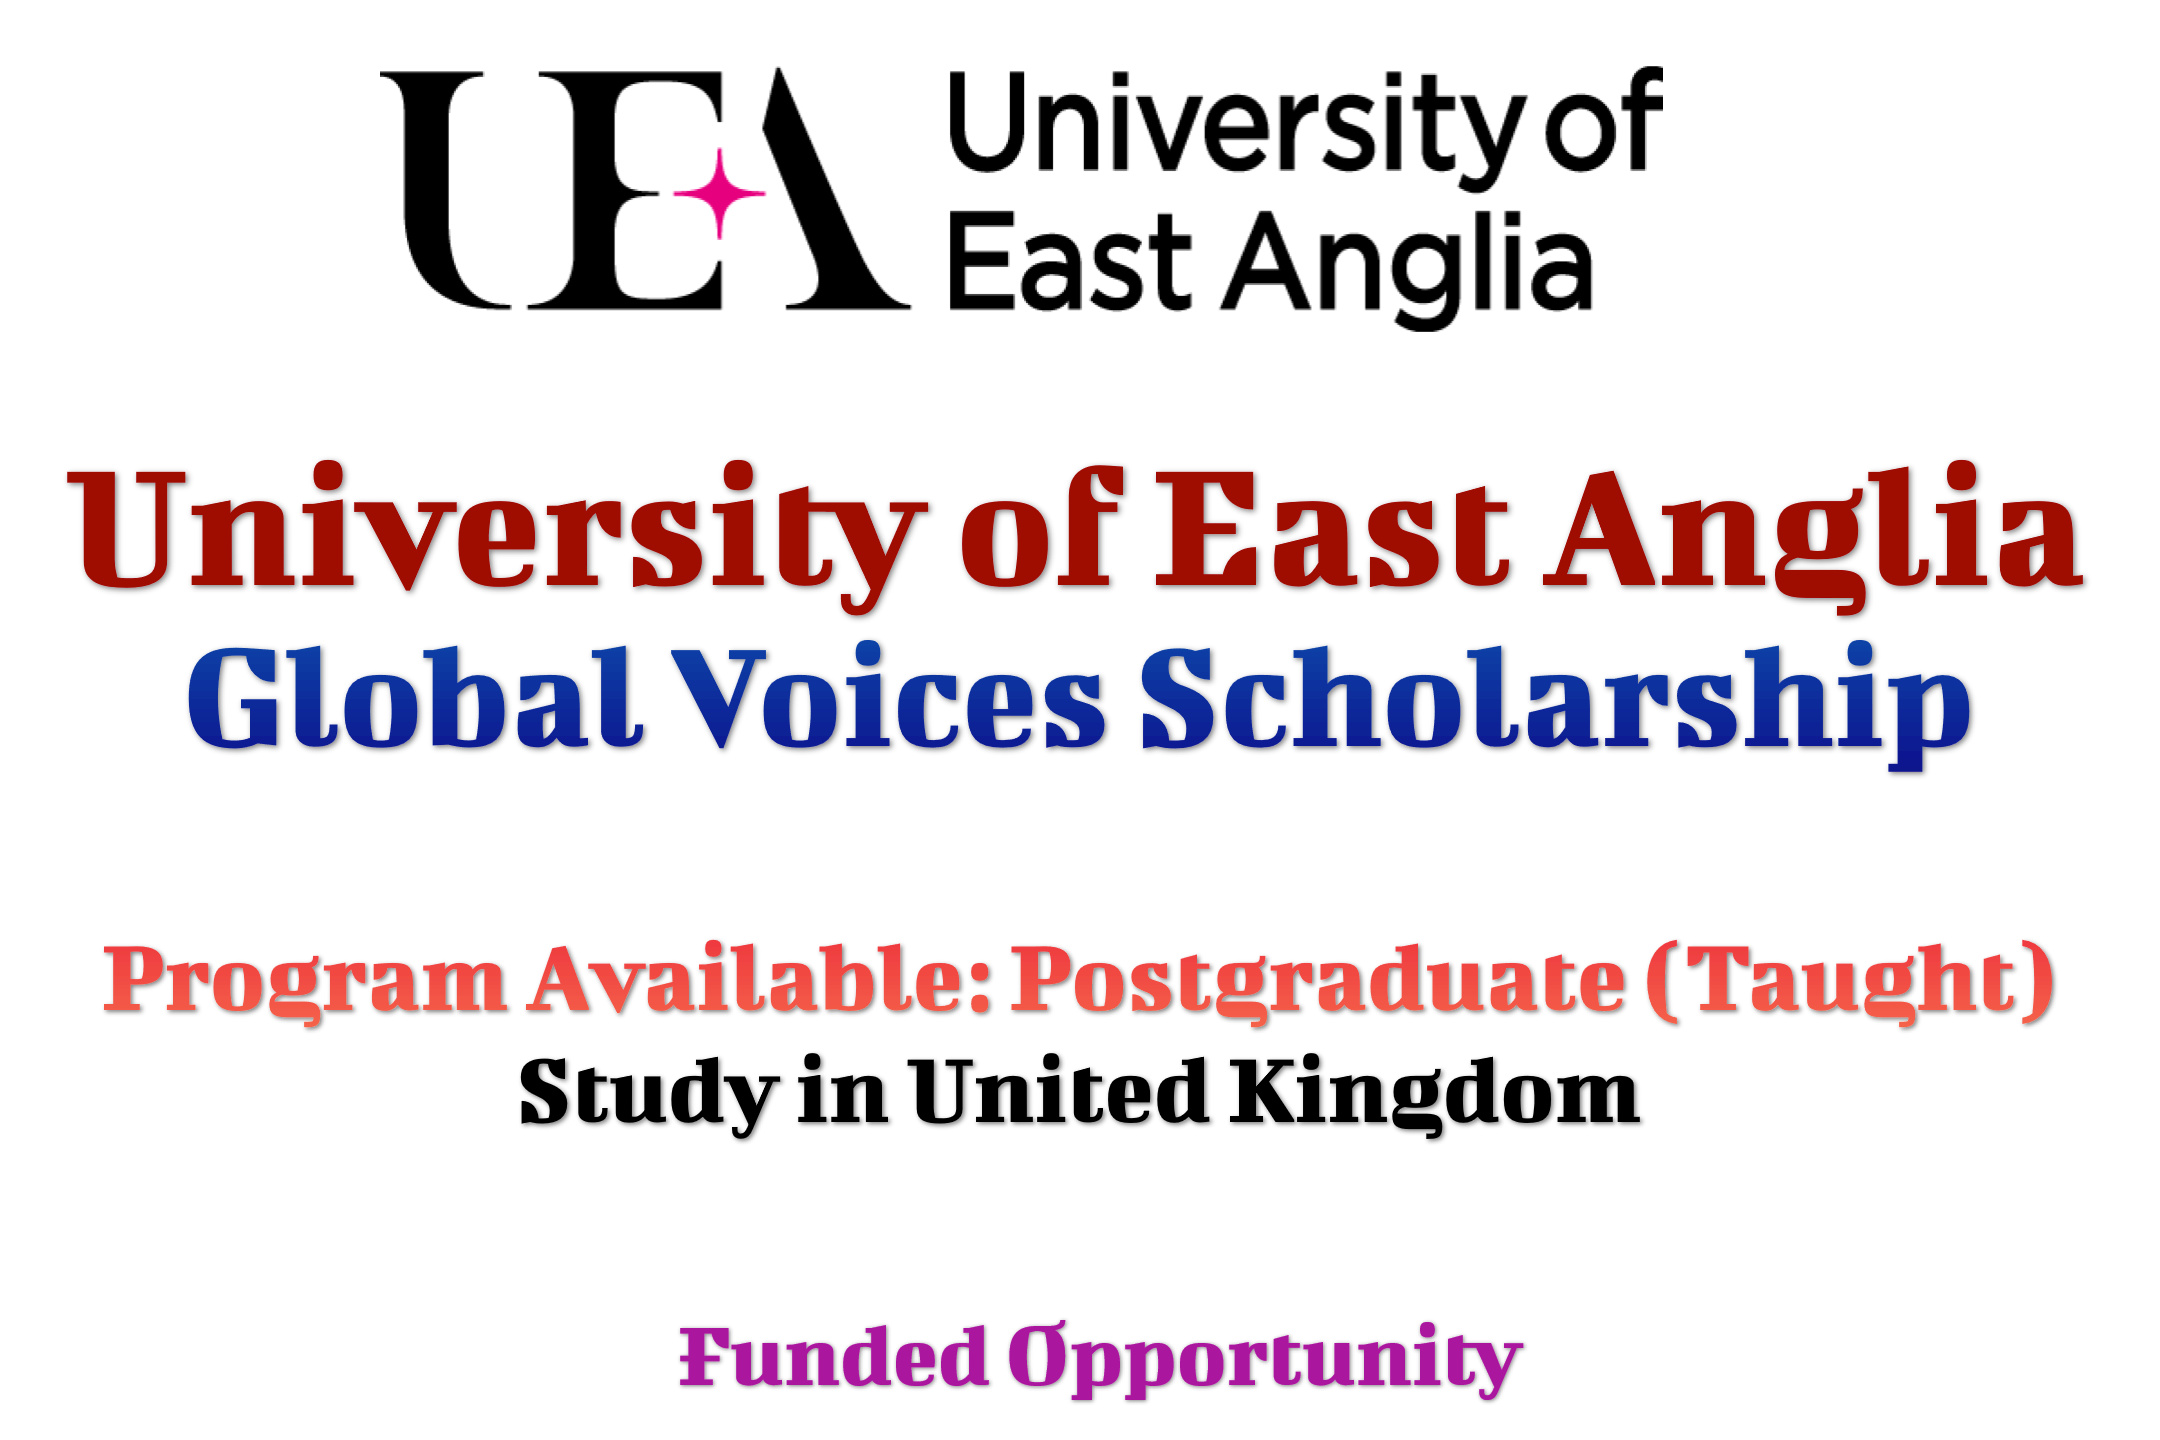 University of East Anglia Global Voices Scholarship